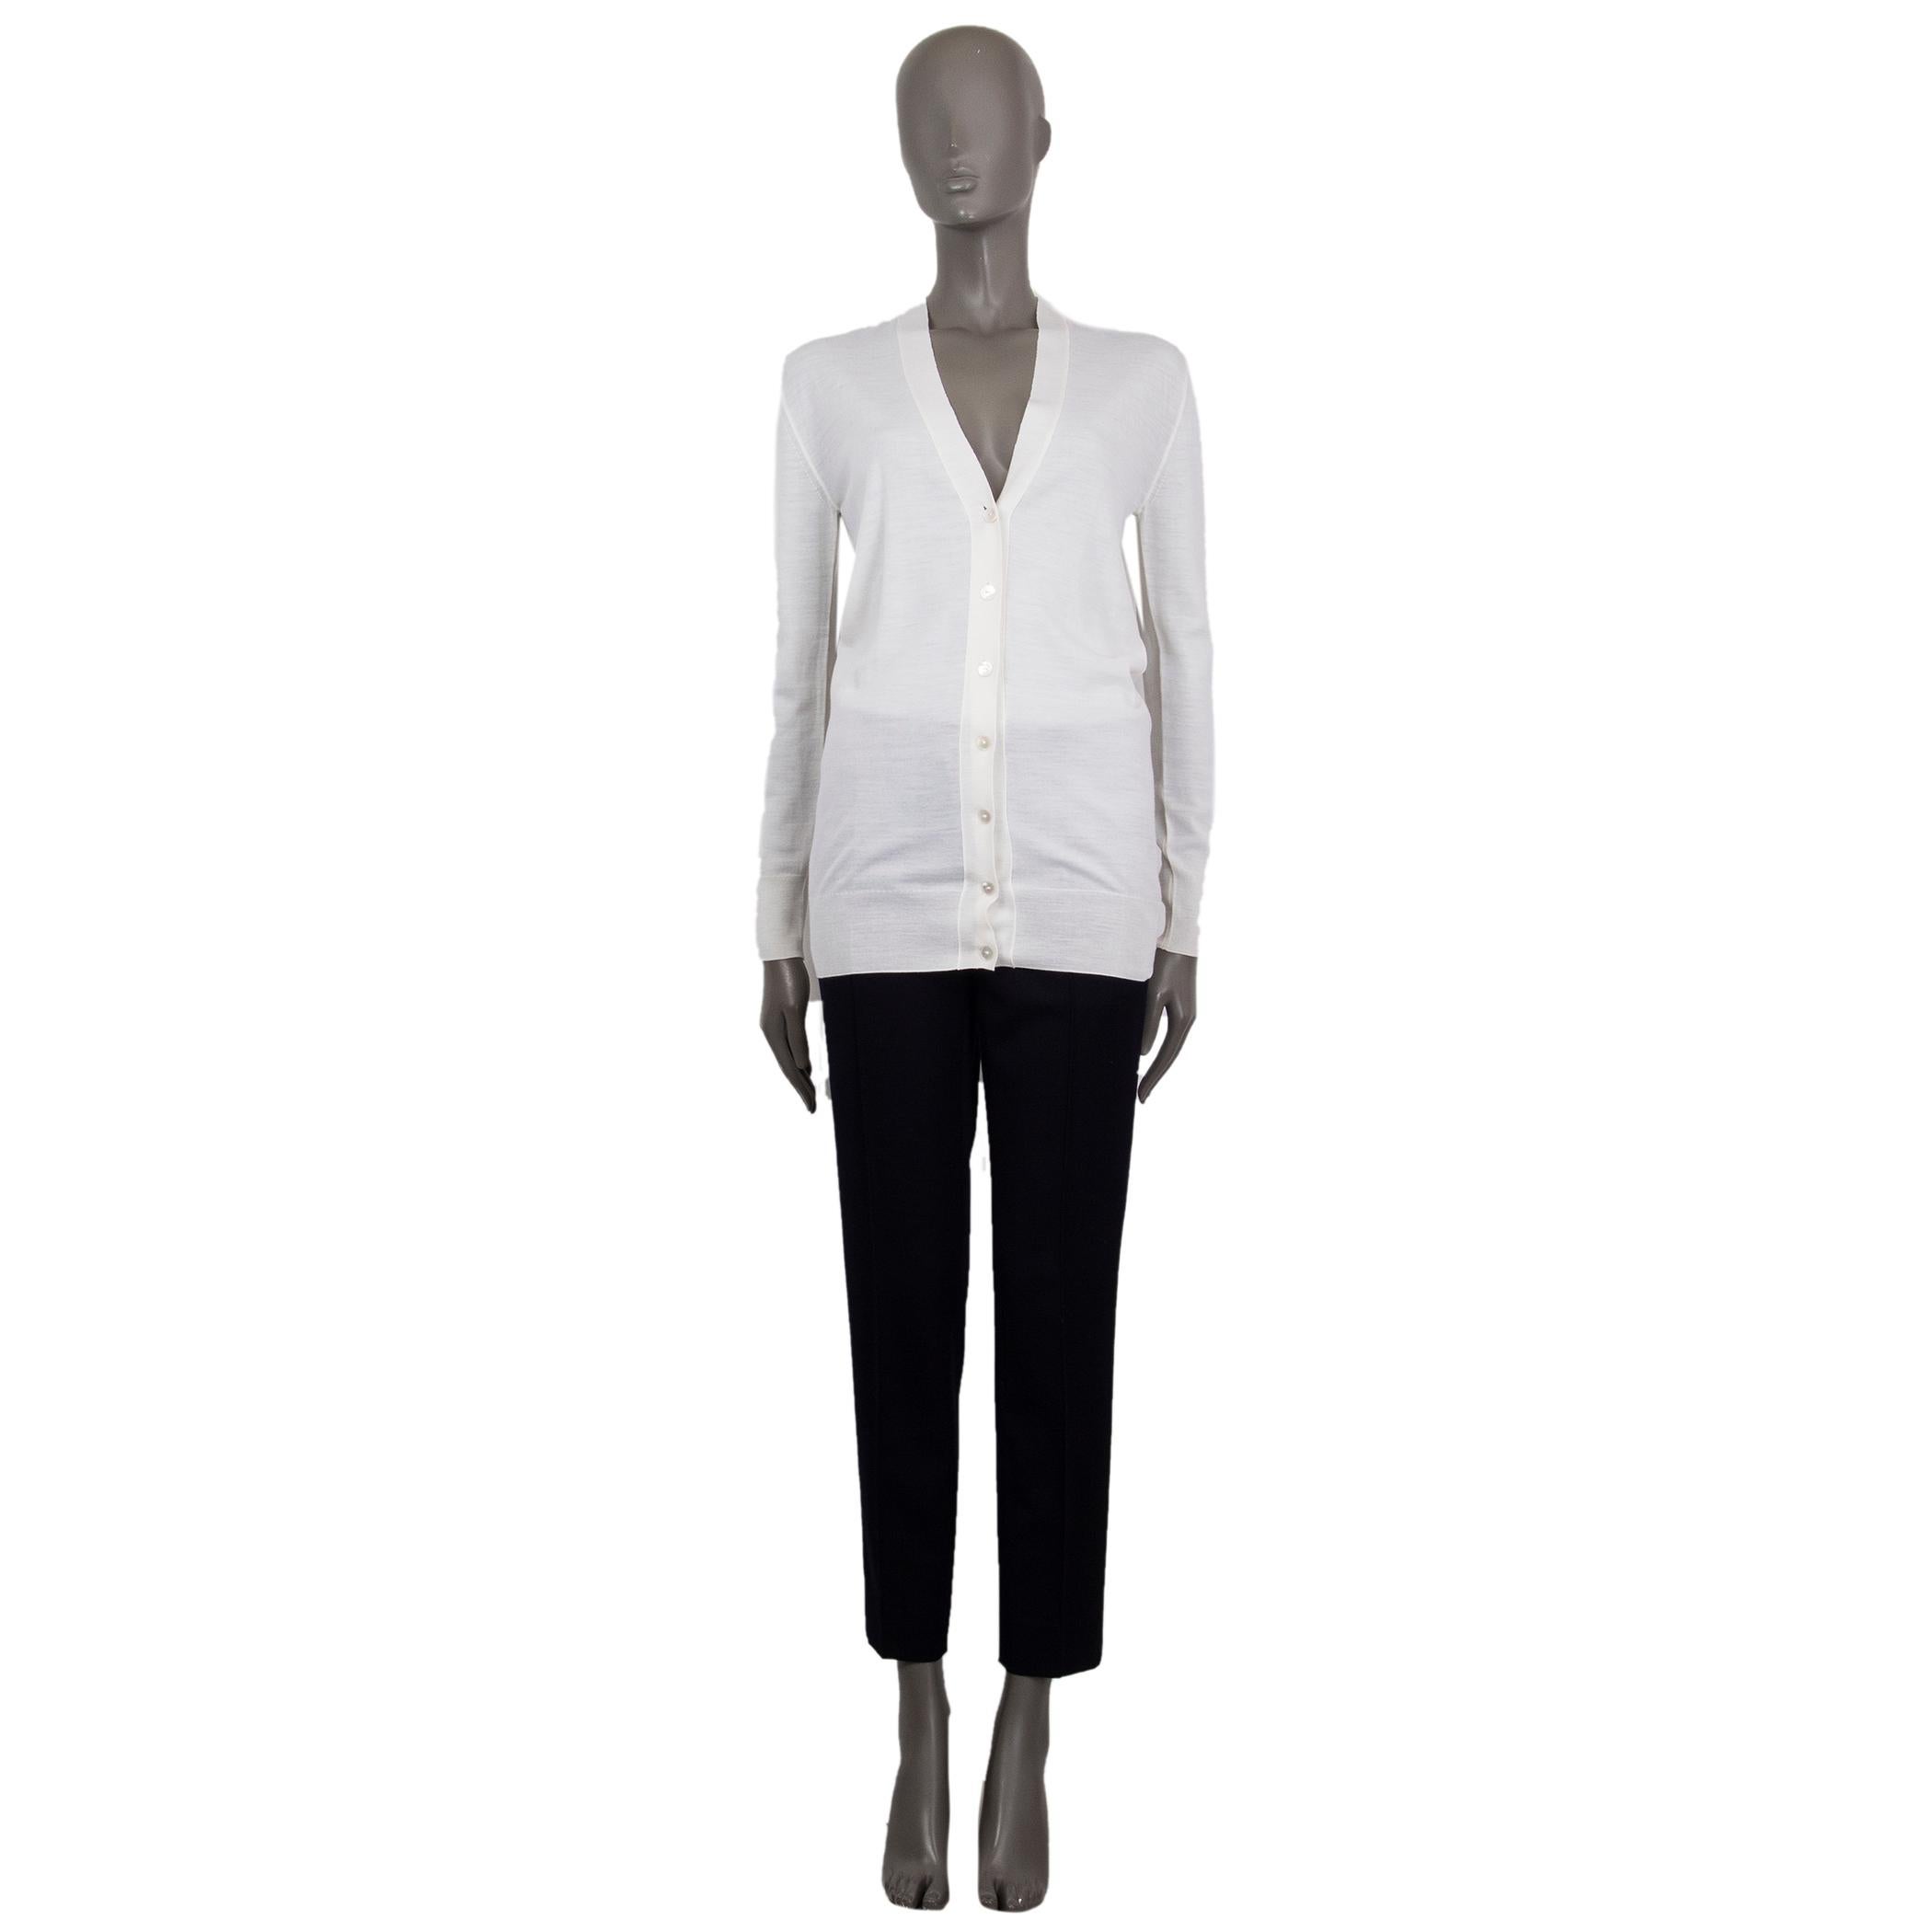 100% authentic Lanvin fine knit cardigan in off-white wool (99%) elastane (1%) with a deep V-neckline, long sleeves, buttons in a pearl effect, ribbed cuffs and hem. Comes in a mid-length and casual fit. Has been worn and is in excellent